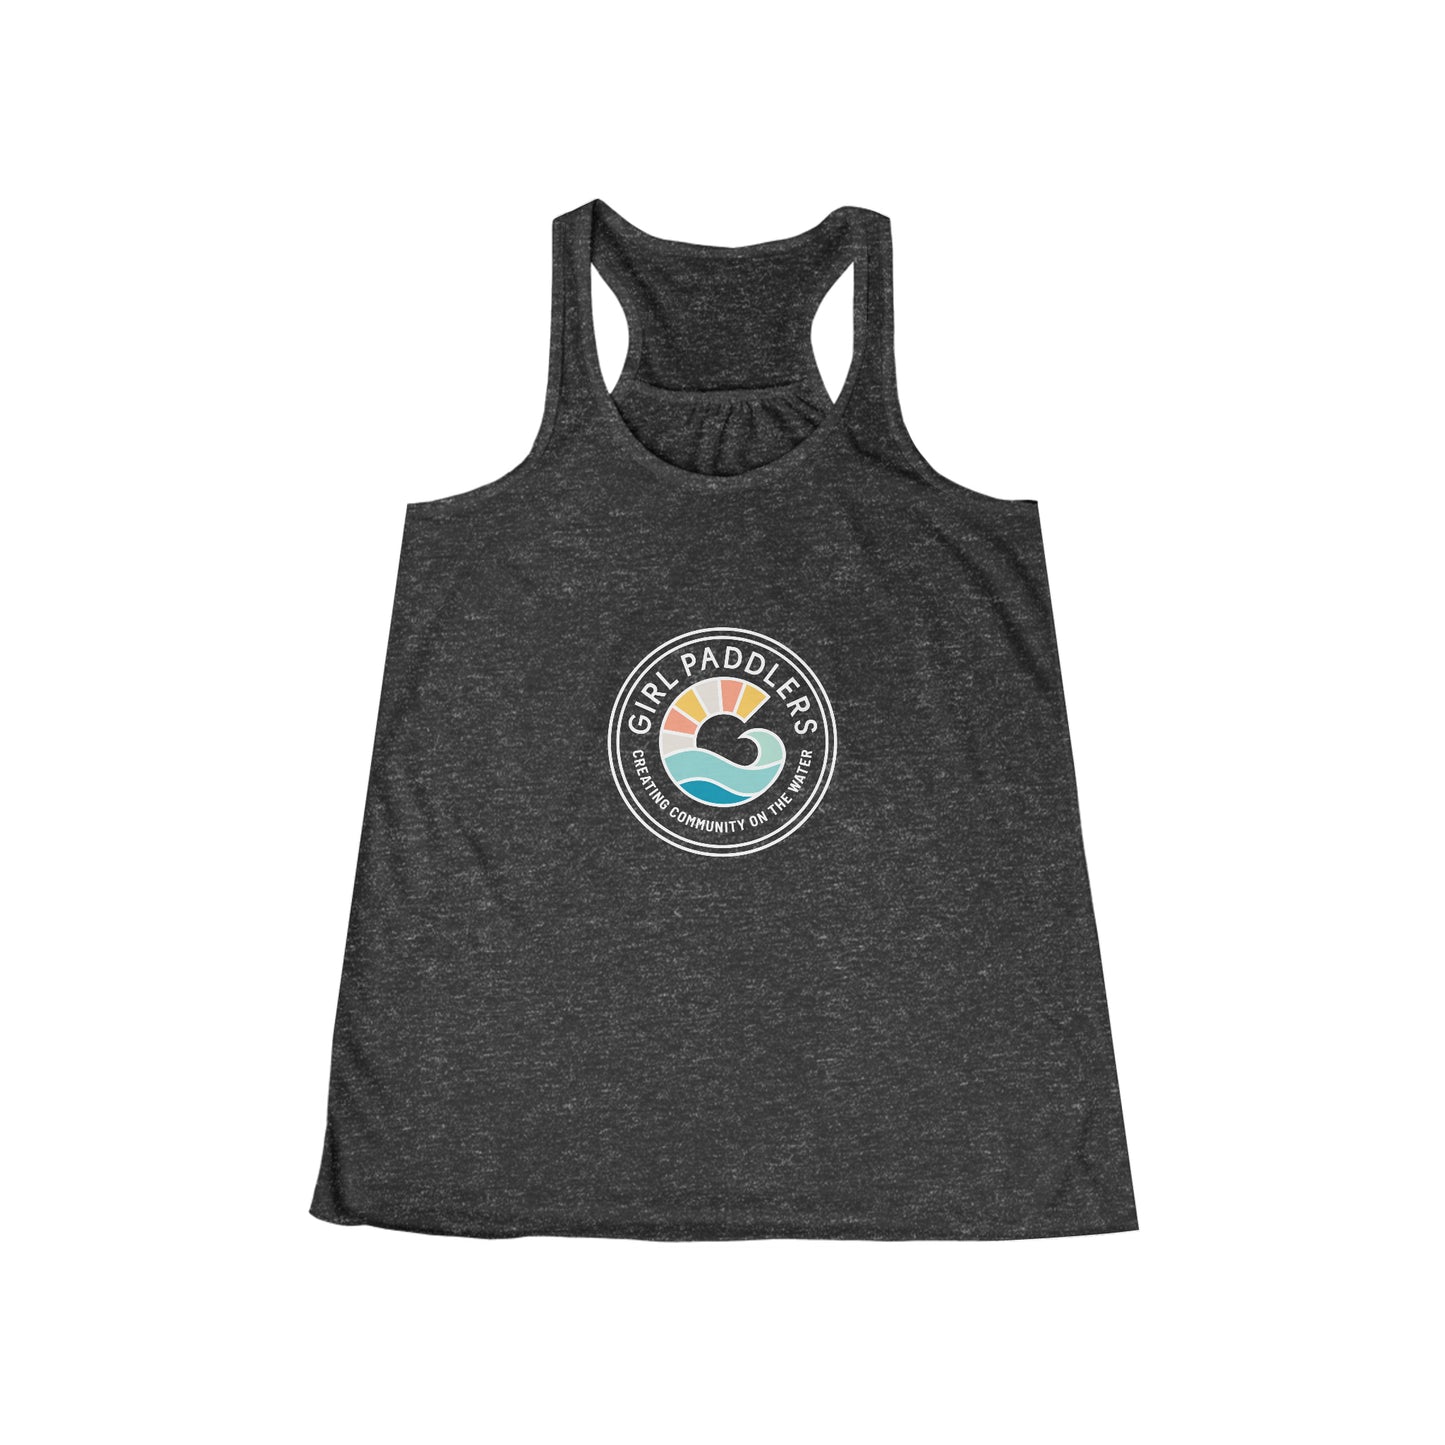 Girl Paddlers Solid Logo Tank - Women's Relaxed Jersey Tank Top